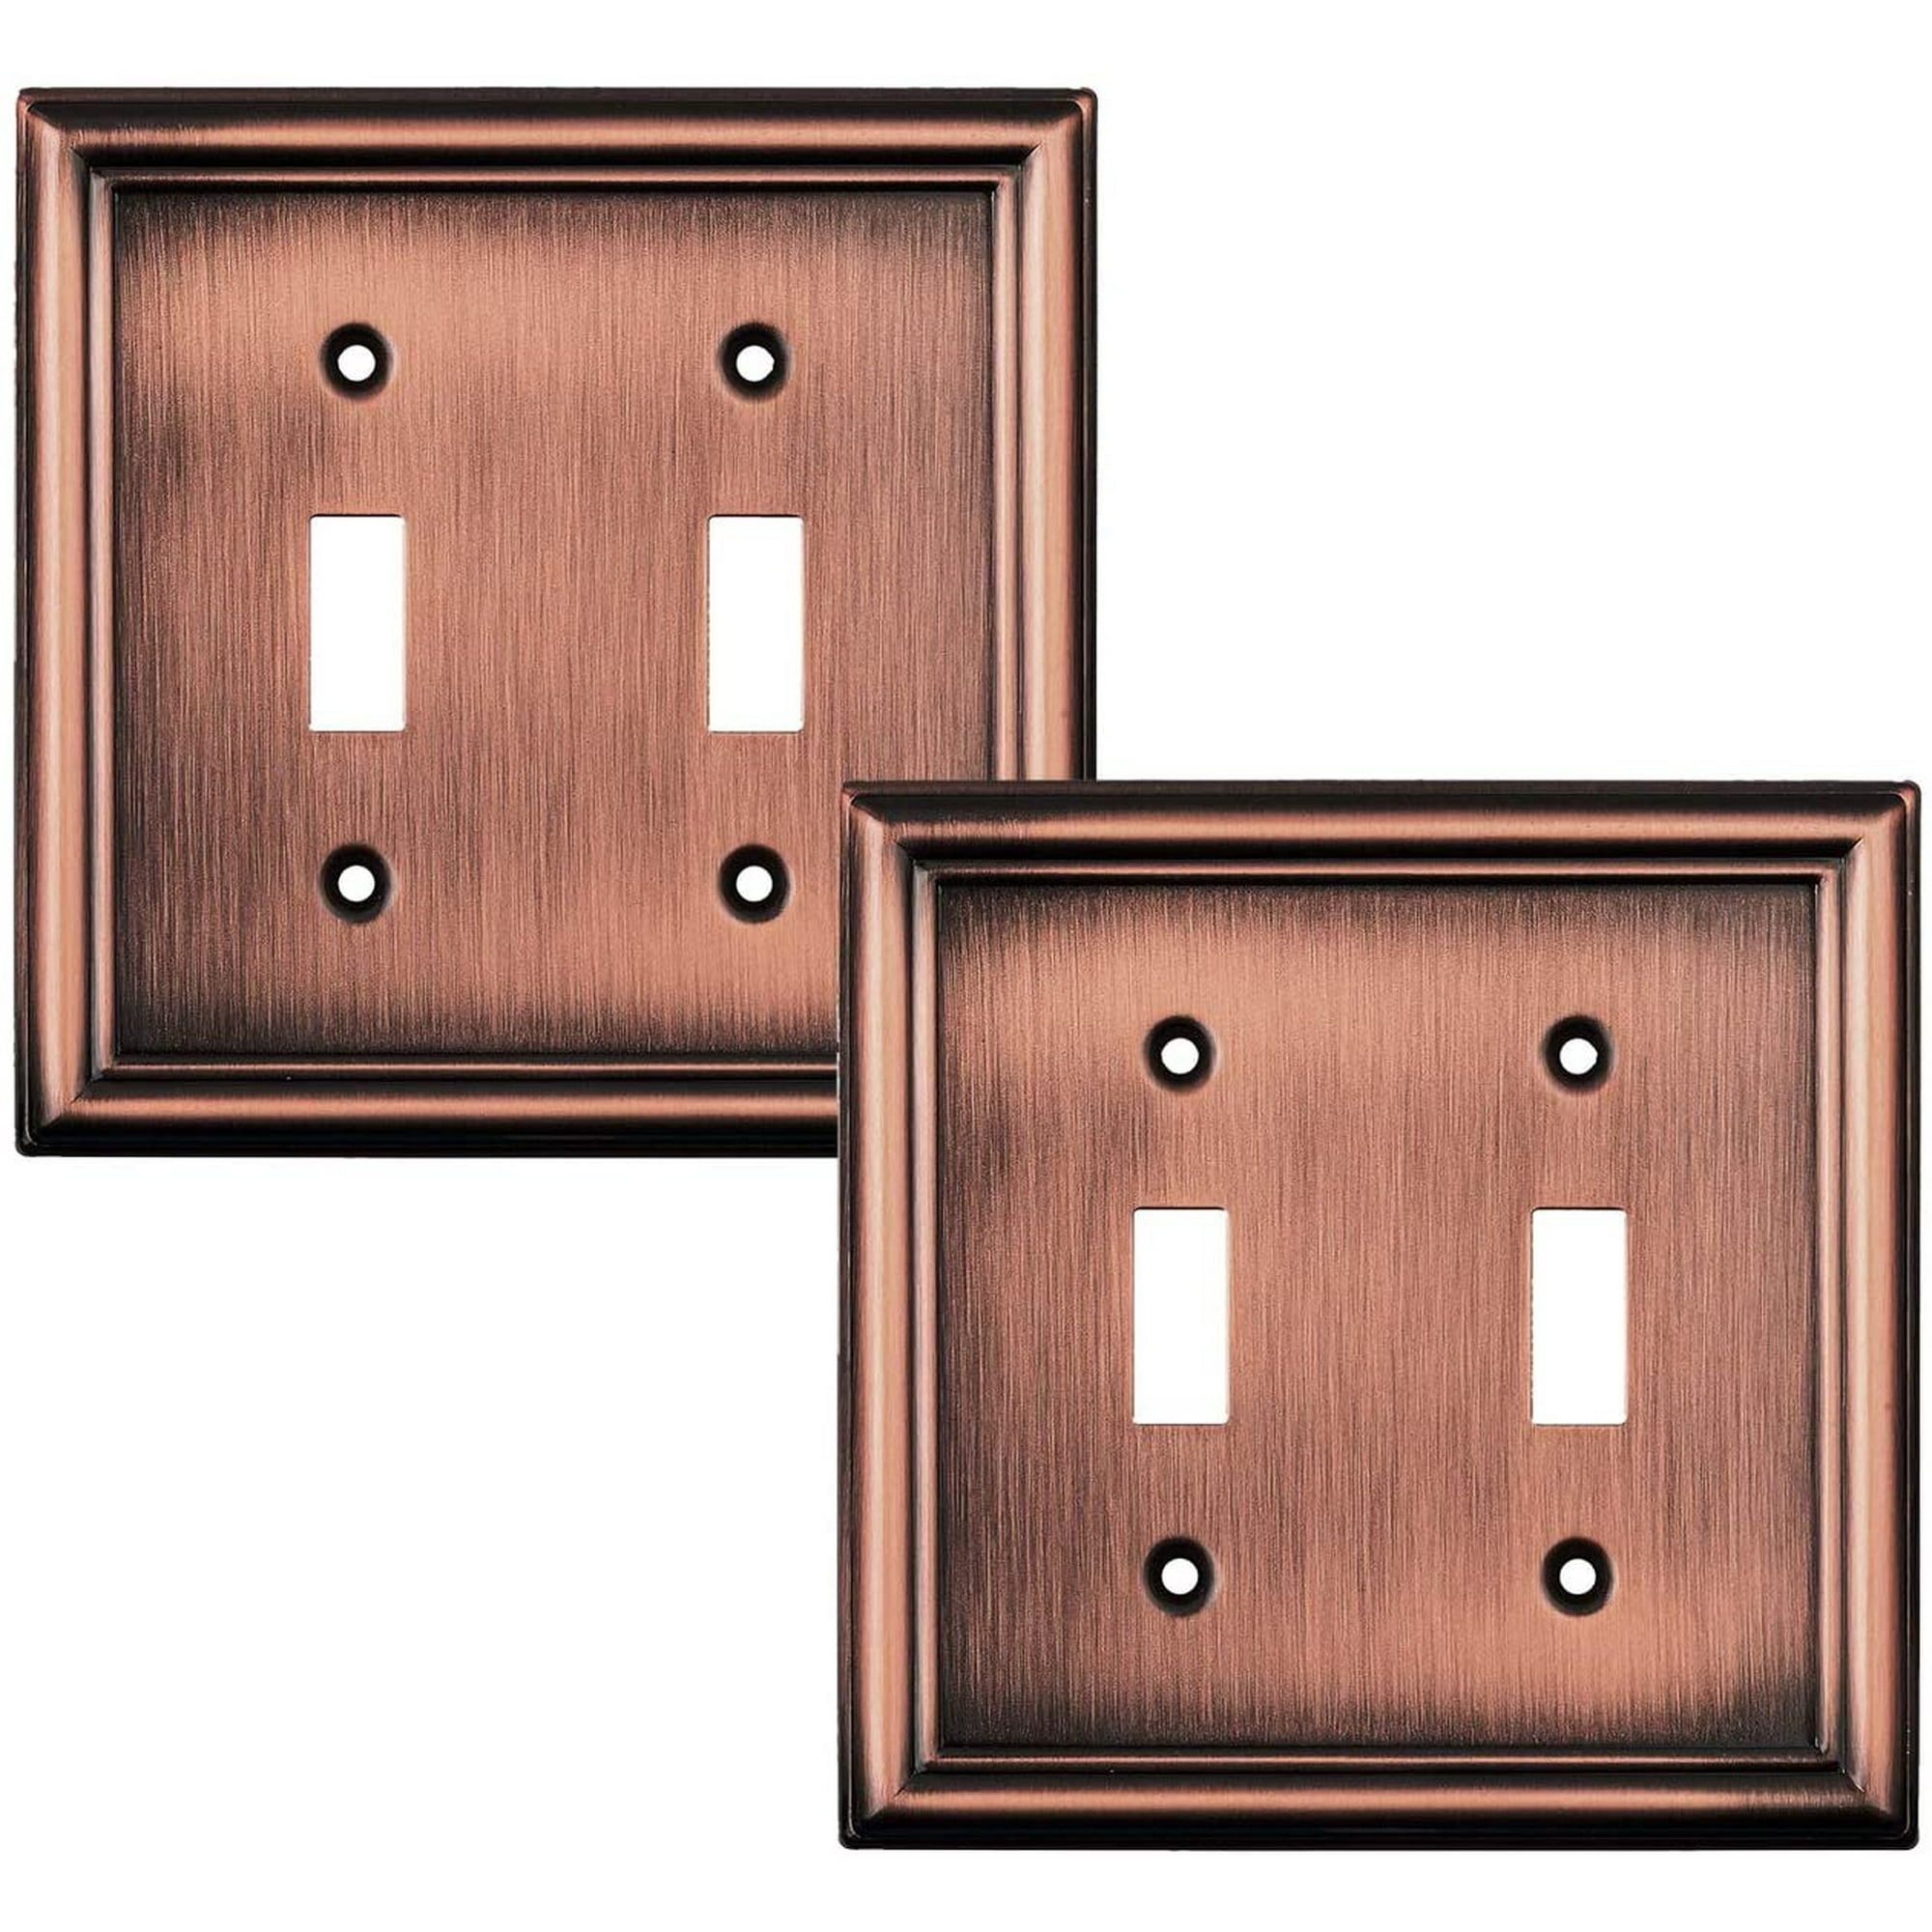 Sleeklighting 2 Pack Decorative Beveled Copper Outlet Covers | 2 ...